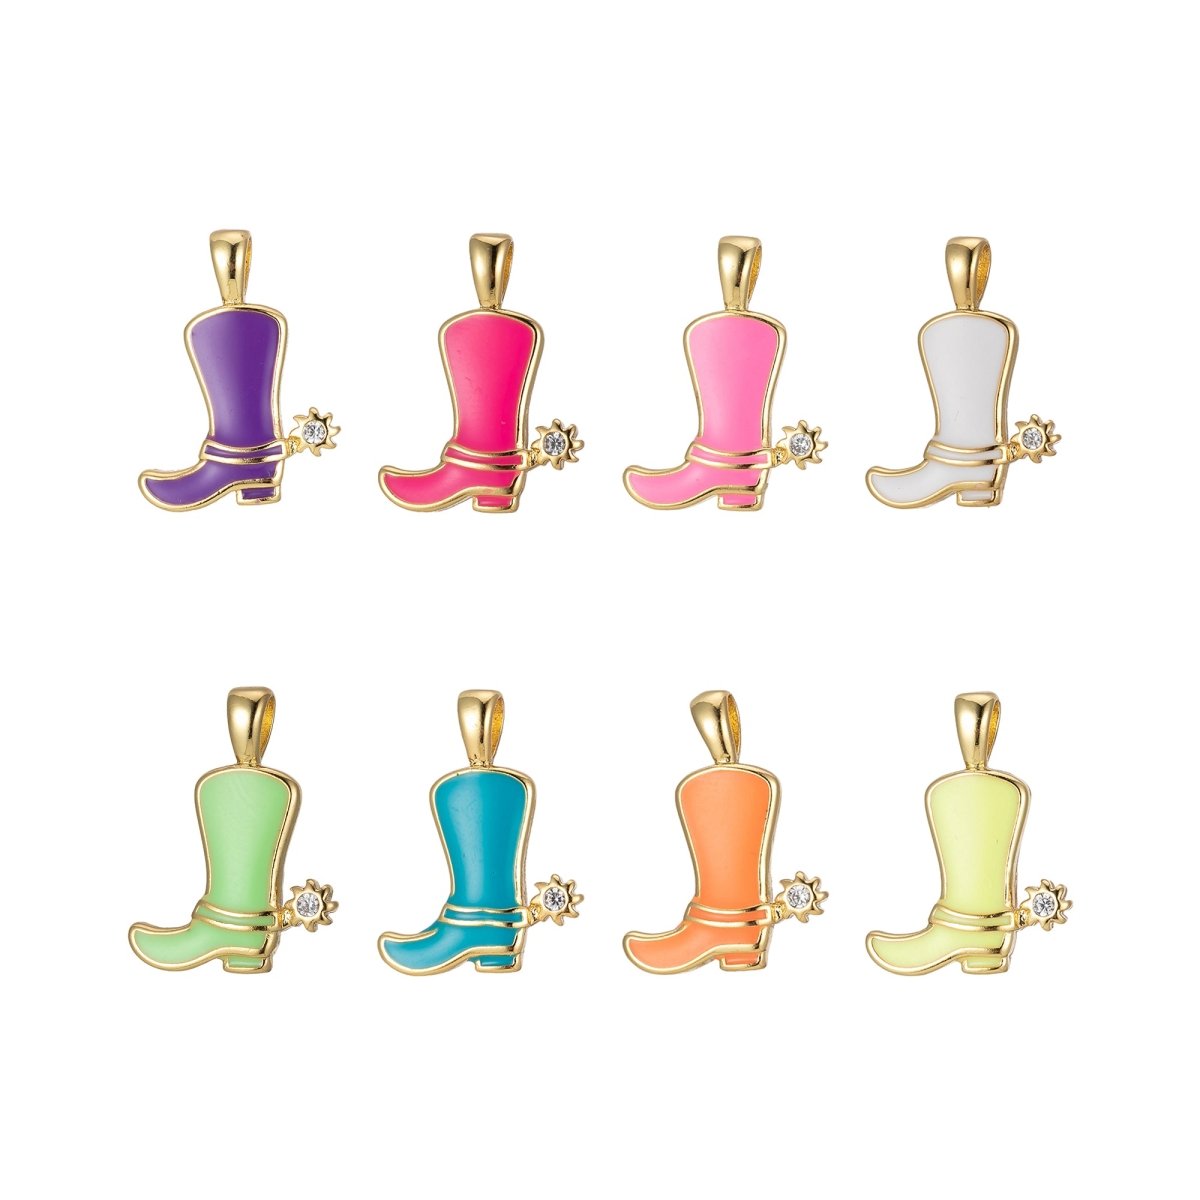 Colorful Cowboy Cowgirl Boot Enamel Charm Pendant Shoes Wild West Inspired H-023 H-033 J-840 - J-847 - DLUXCA